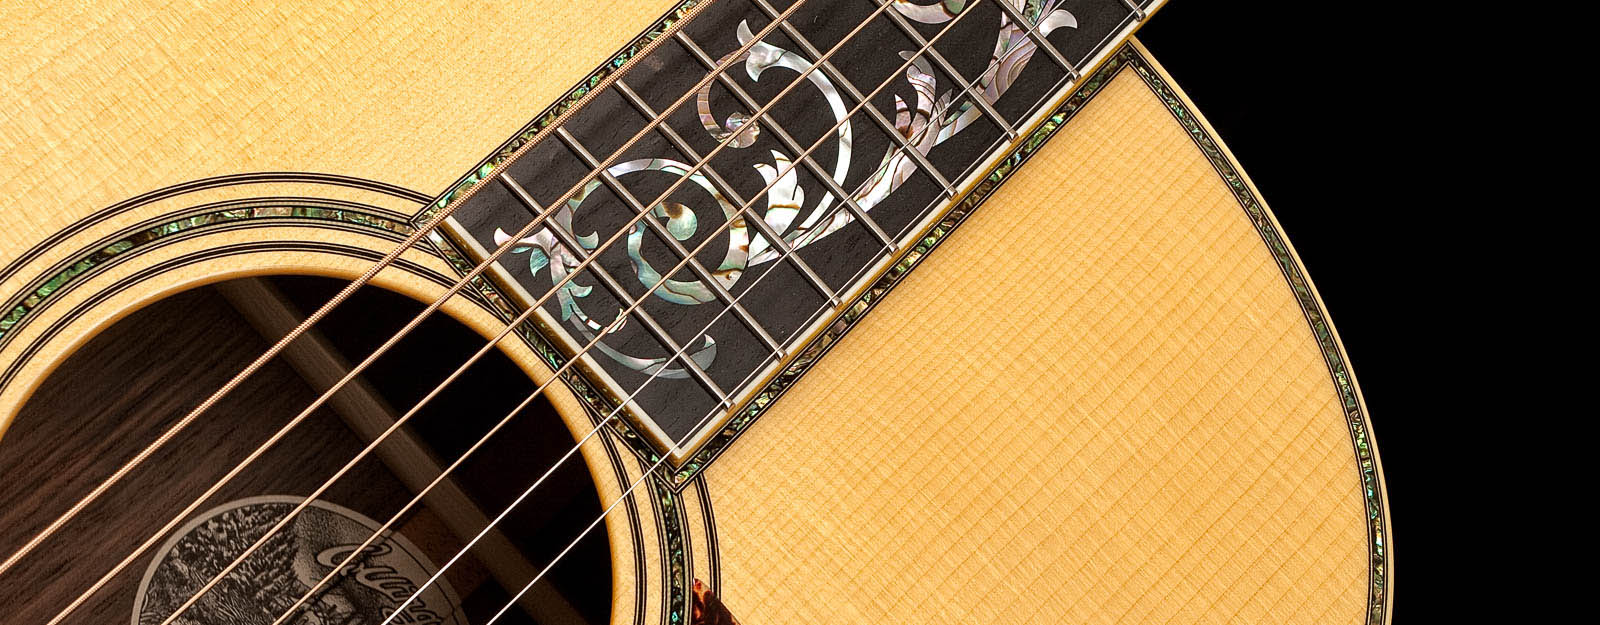 Custom Acoustic Guitar with Tree of Life Fingerboard Inlay